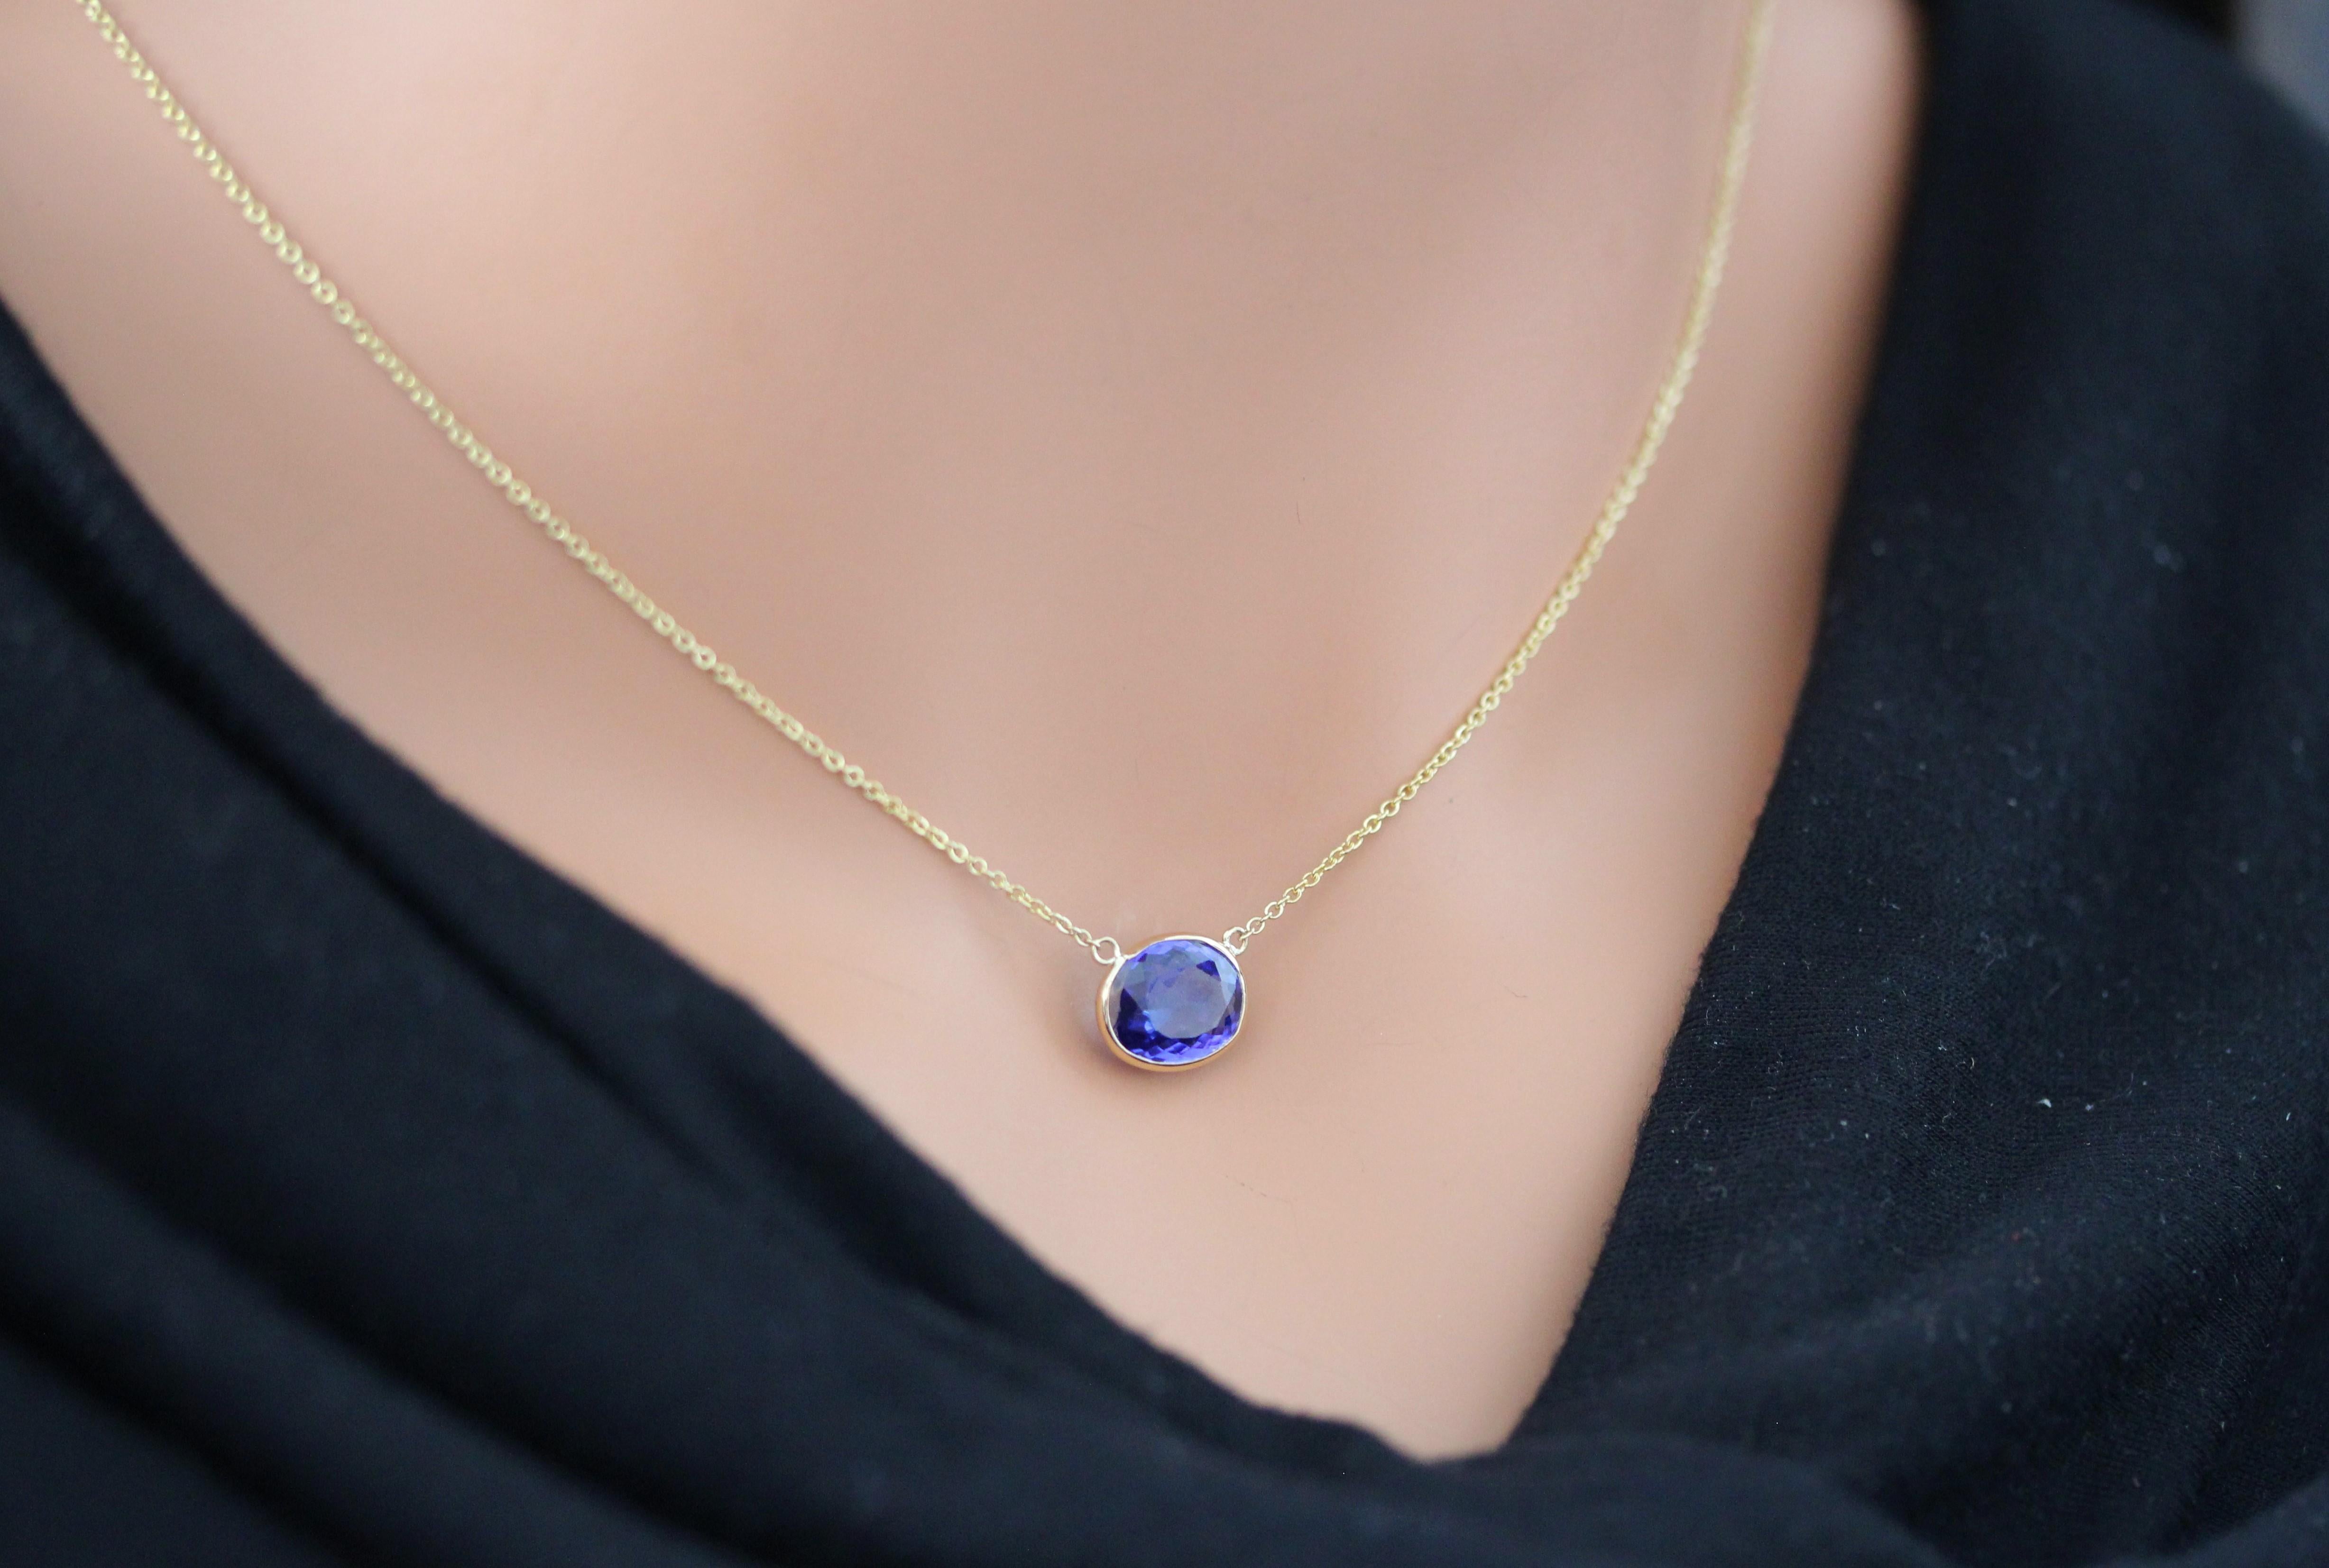 Oval Cut 3.18 Carat Oval Tanzanite Blue Fashion Necklaces In 14k Yellow Gold For Sale